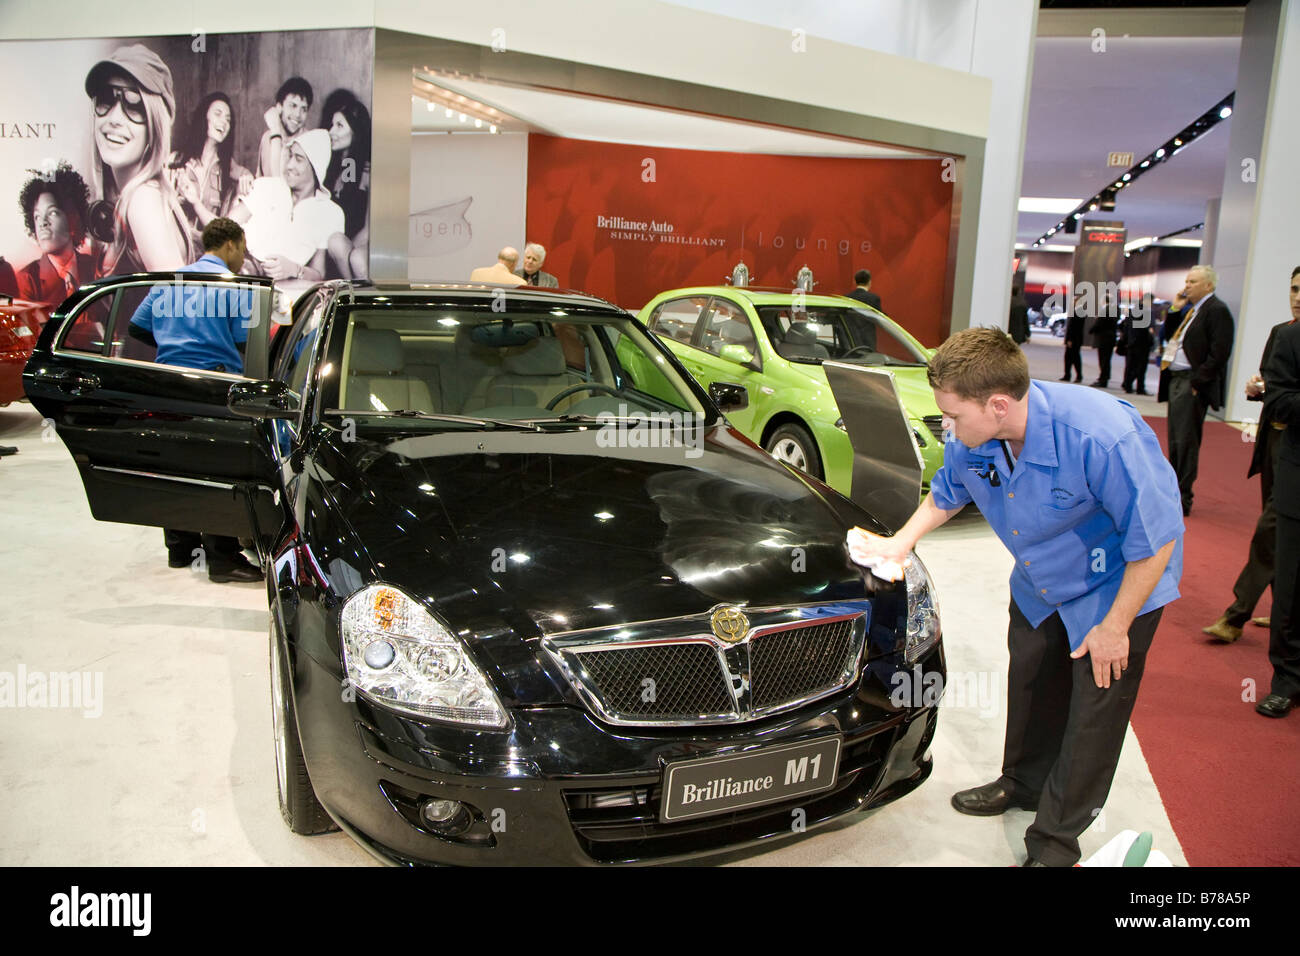 Detroit Michigan Workers polish the Chinese made Brilliance M1 at the North American International Auto Show Stock Photo